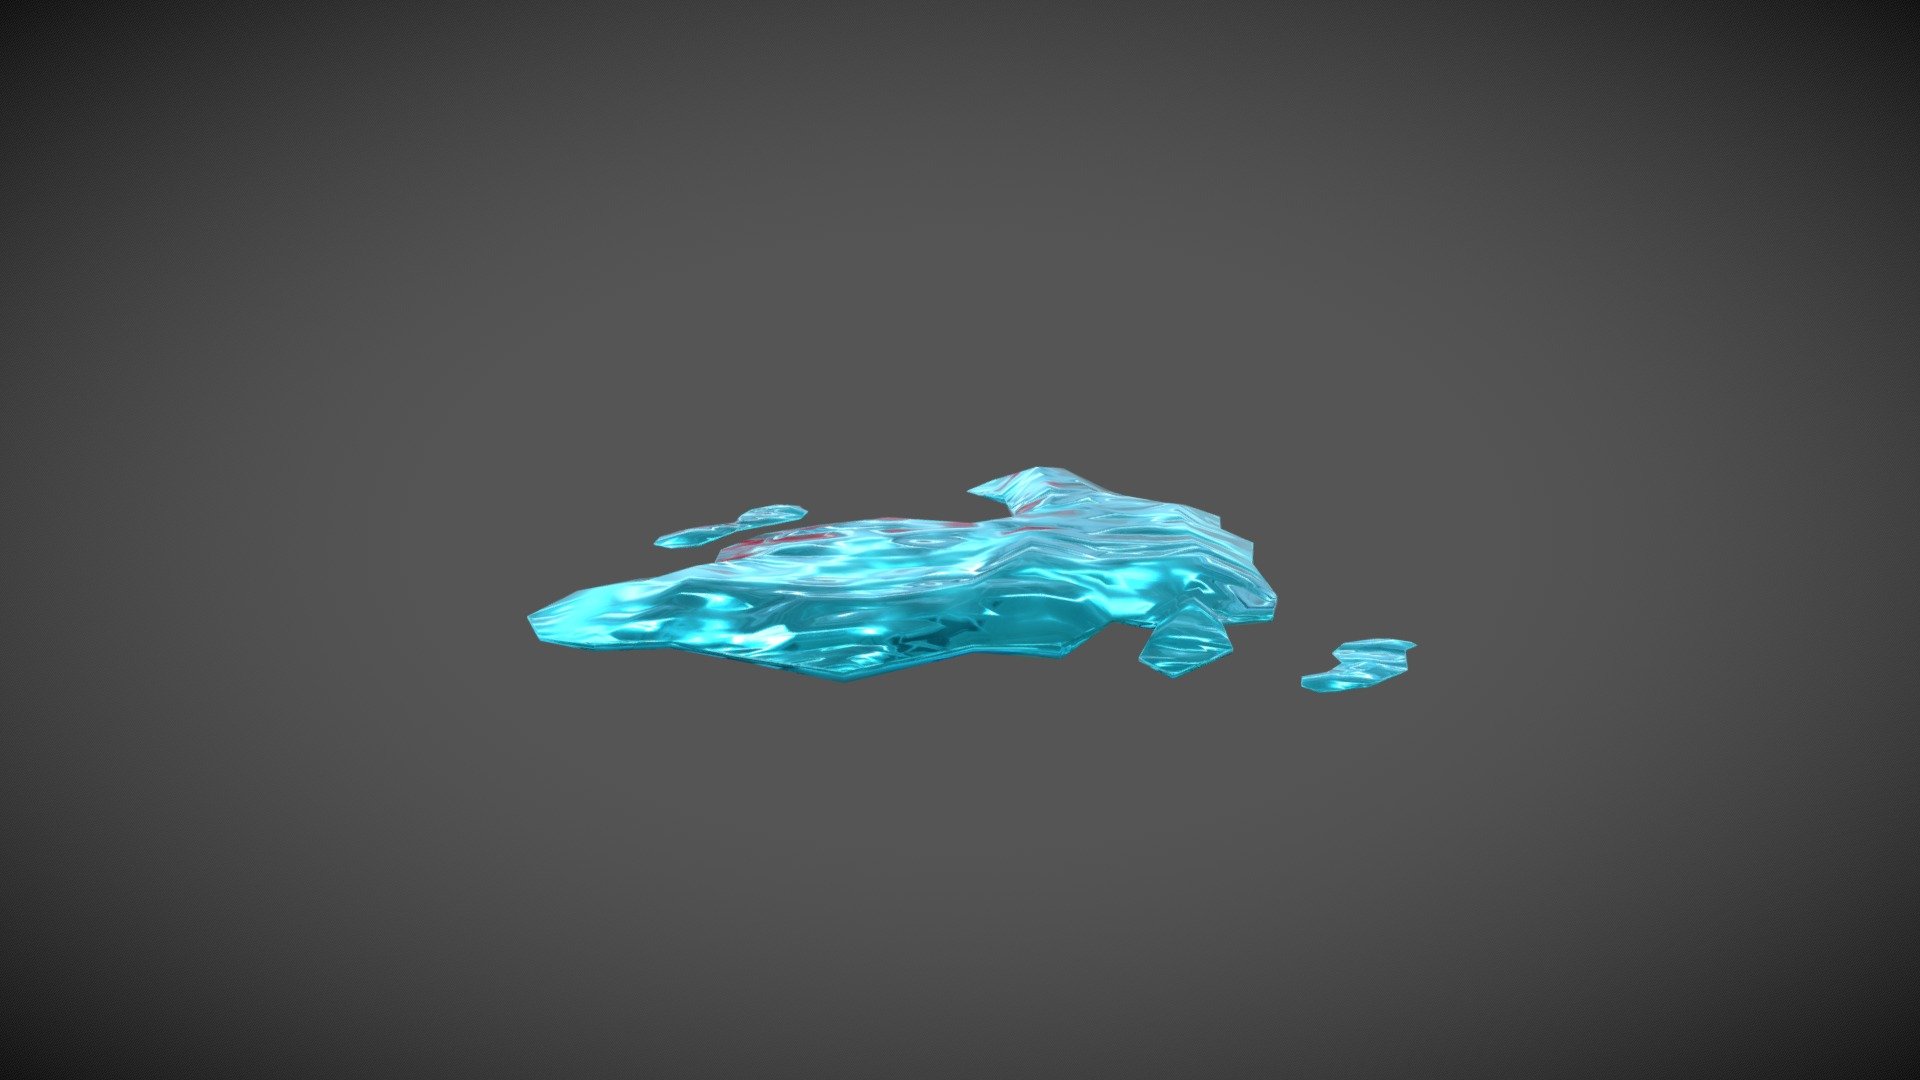 Water puddle pick up for a janitor cleaning game project. All assets for this were kept with a low poly appearance to match the overall style 3d model